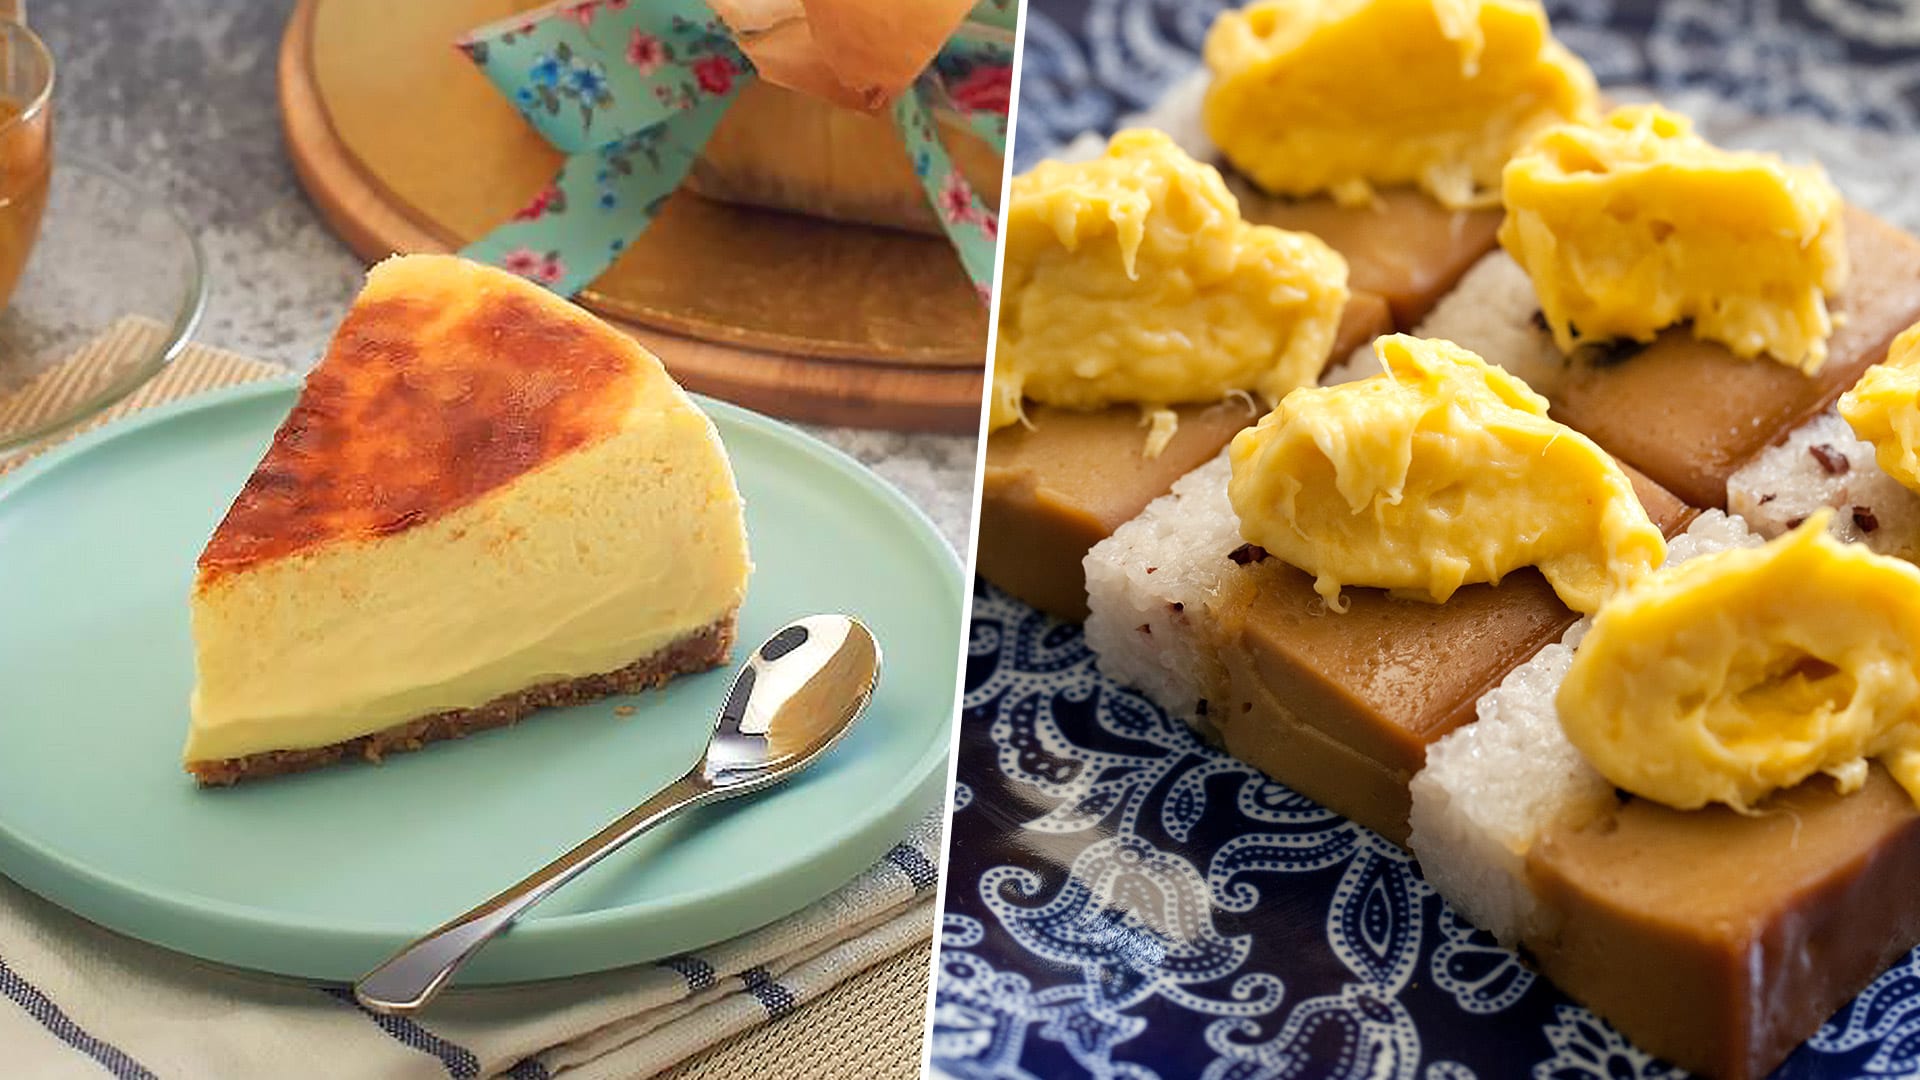 6 Durian Desserts For Father’s Day, Including Mao Shan Wang Kueh Salat & Burnt Cheesecake